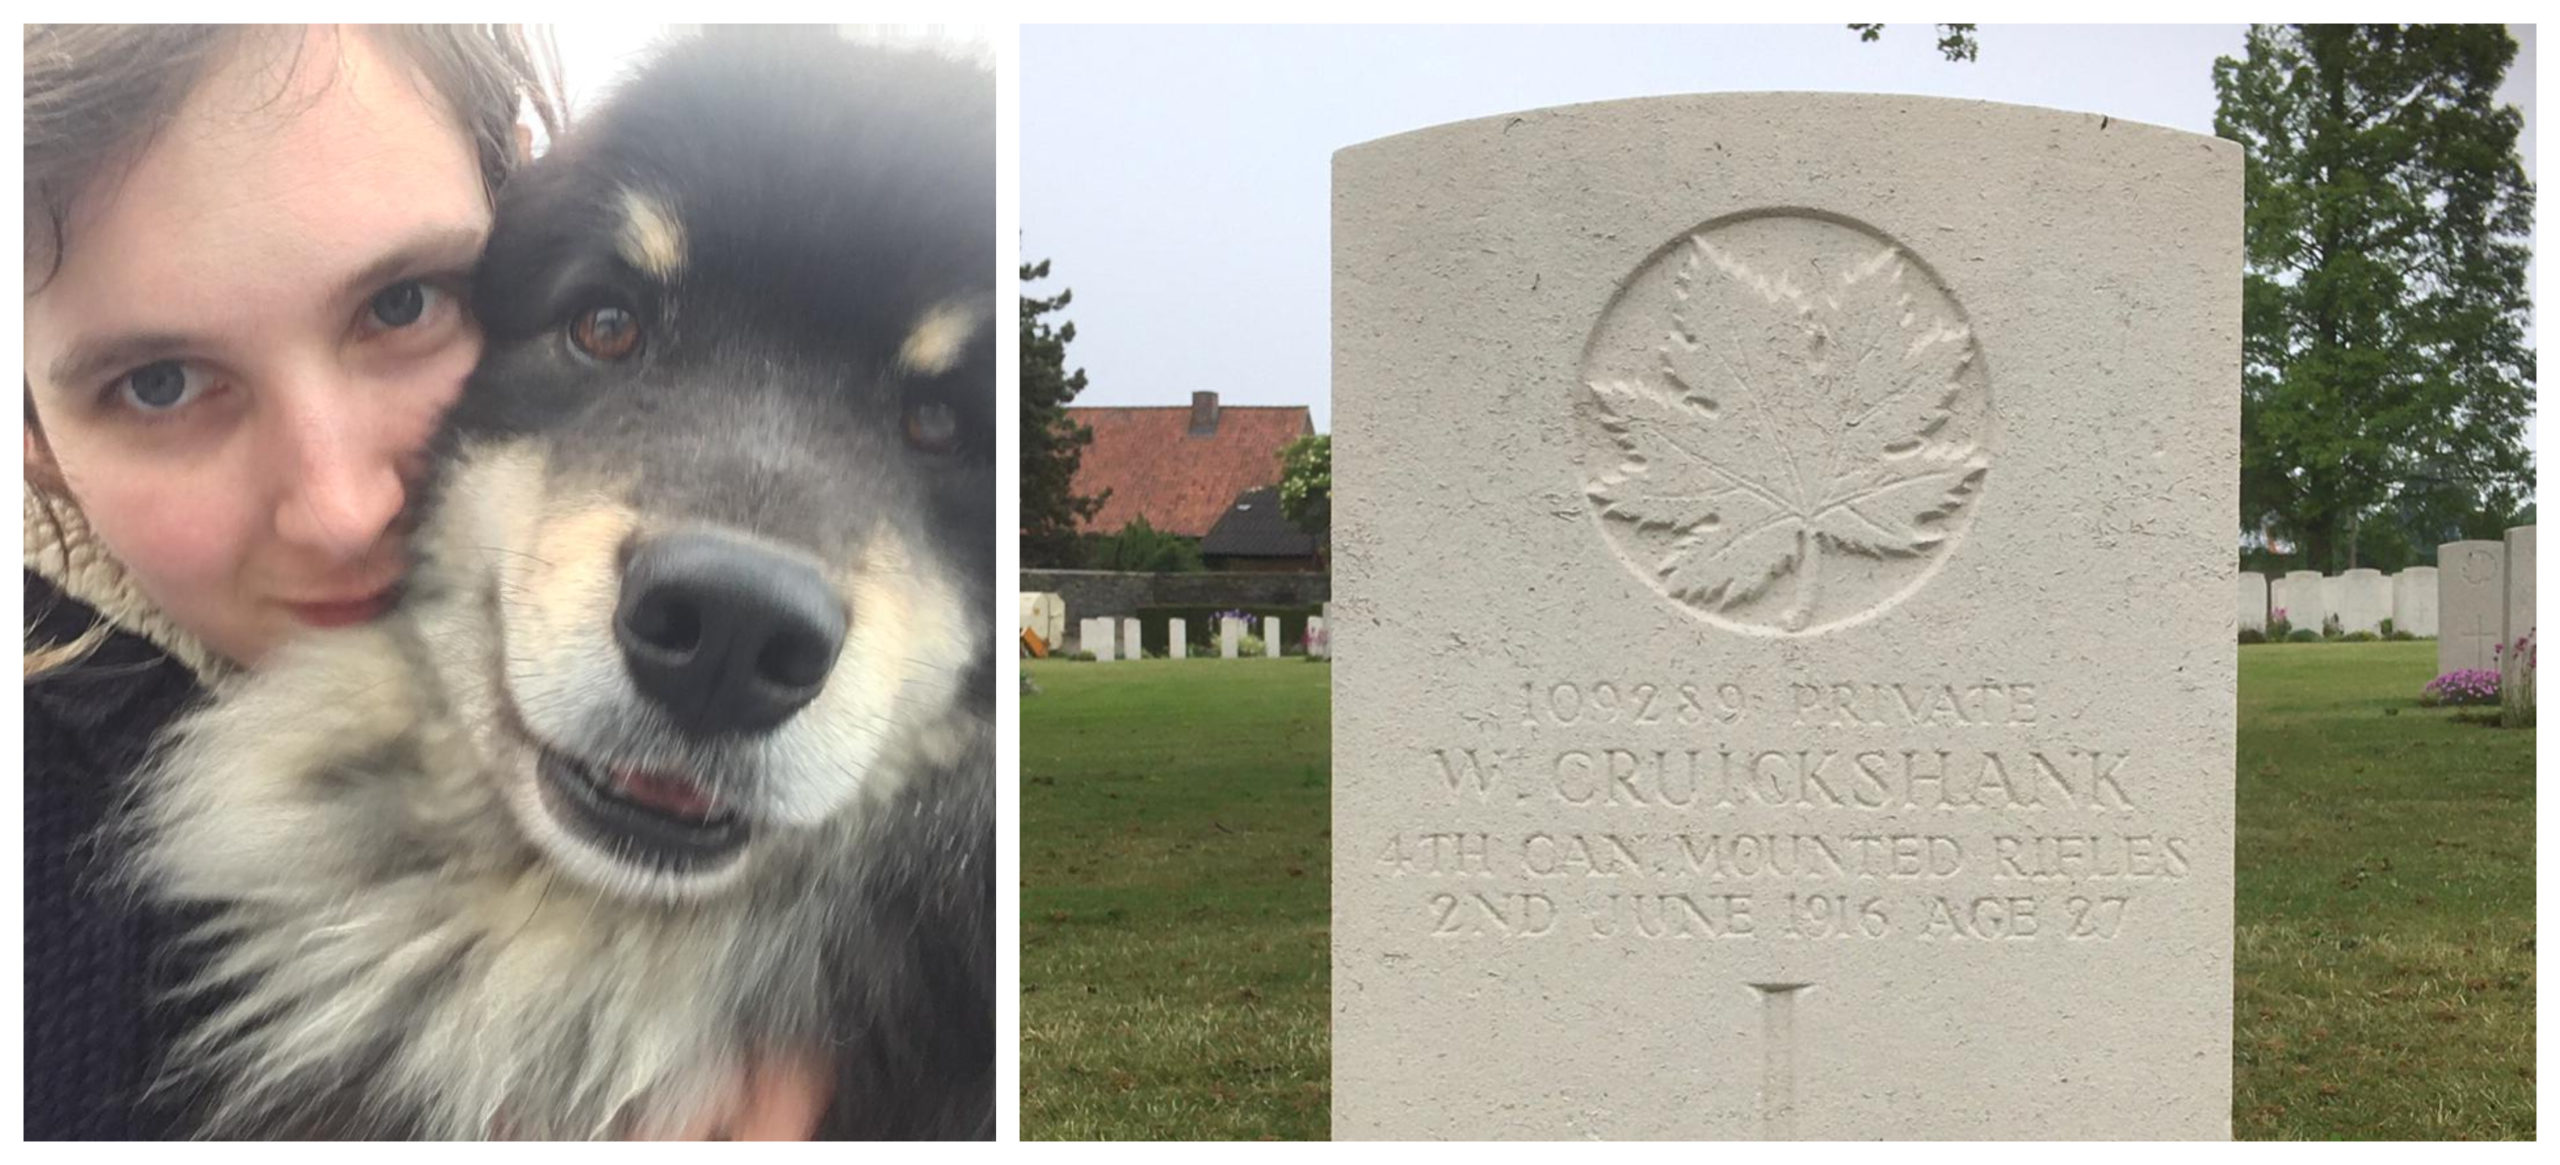 Pet-sitter Ilka, left, has adopted the grave of Aberdeen-born soldier William Cruickshank